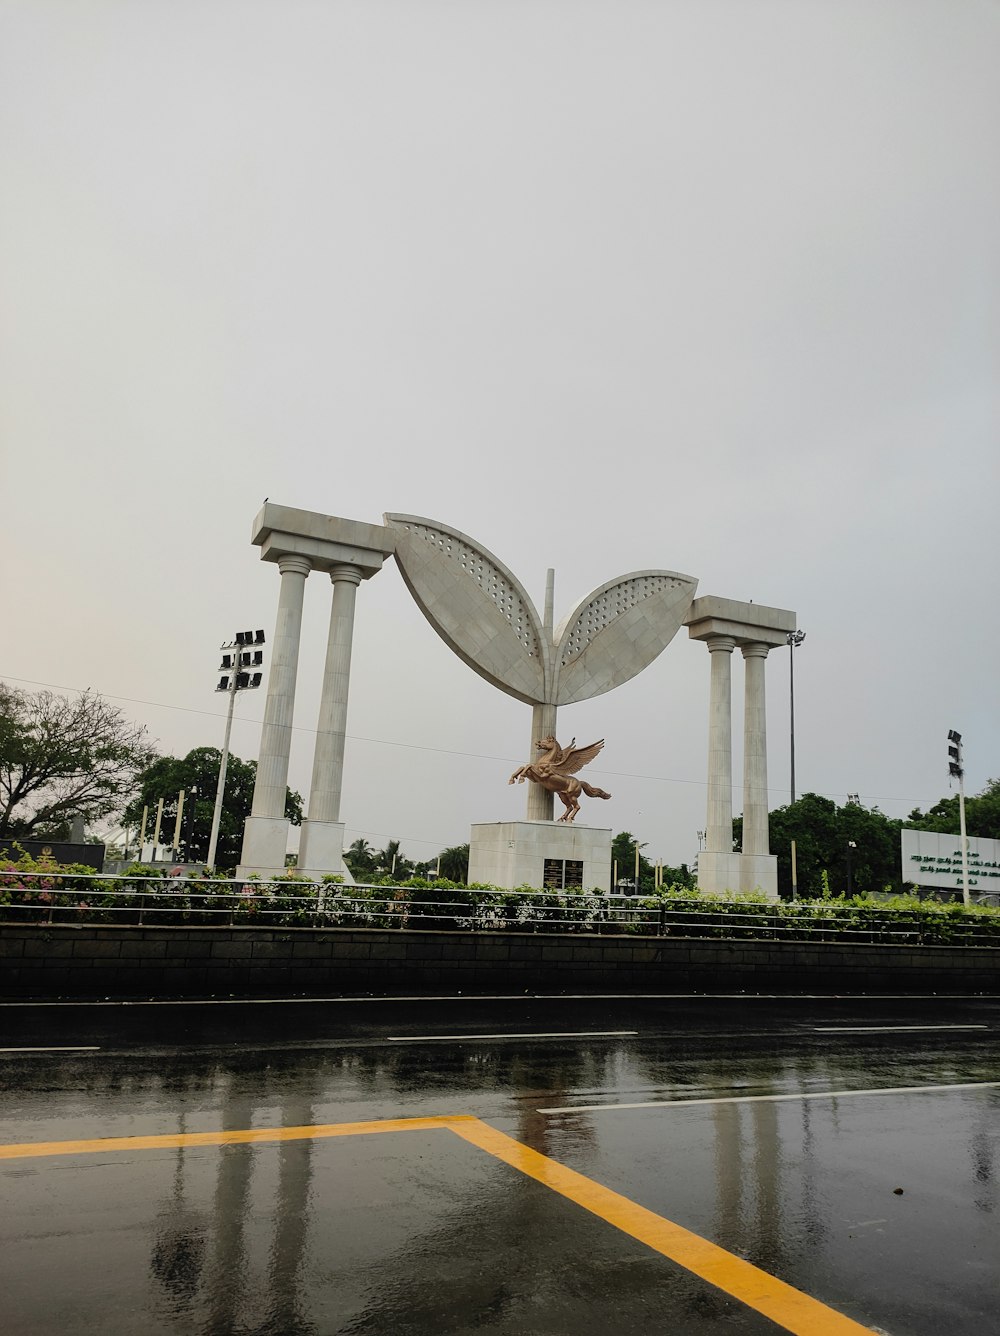 a large statue of a bird in the middle of a road